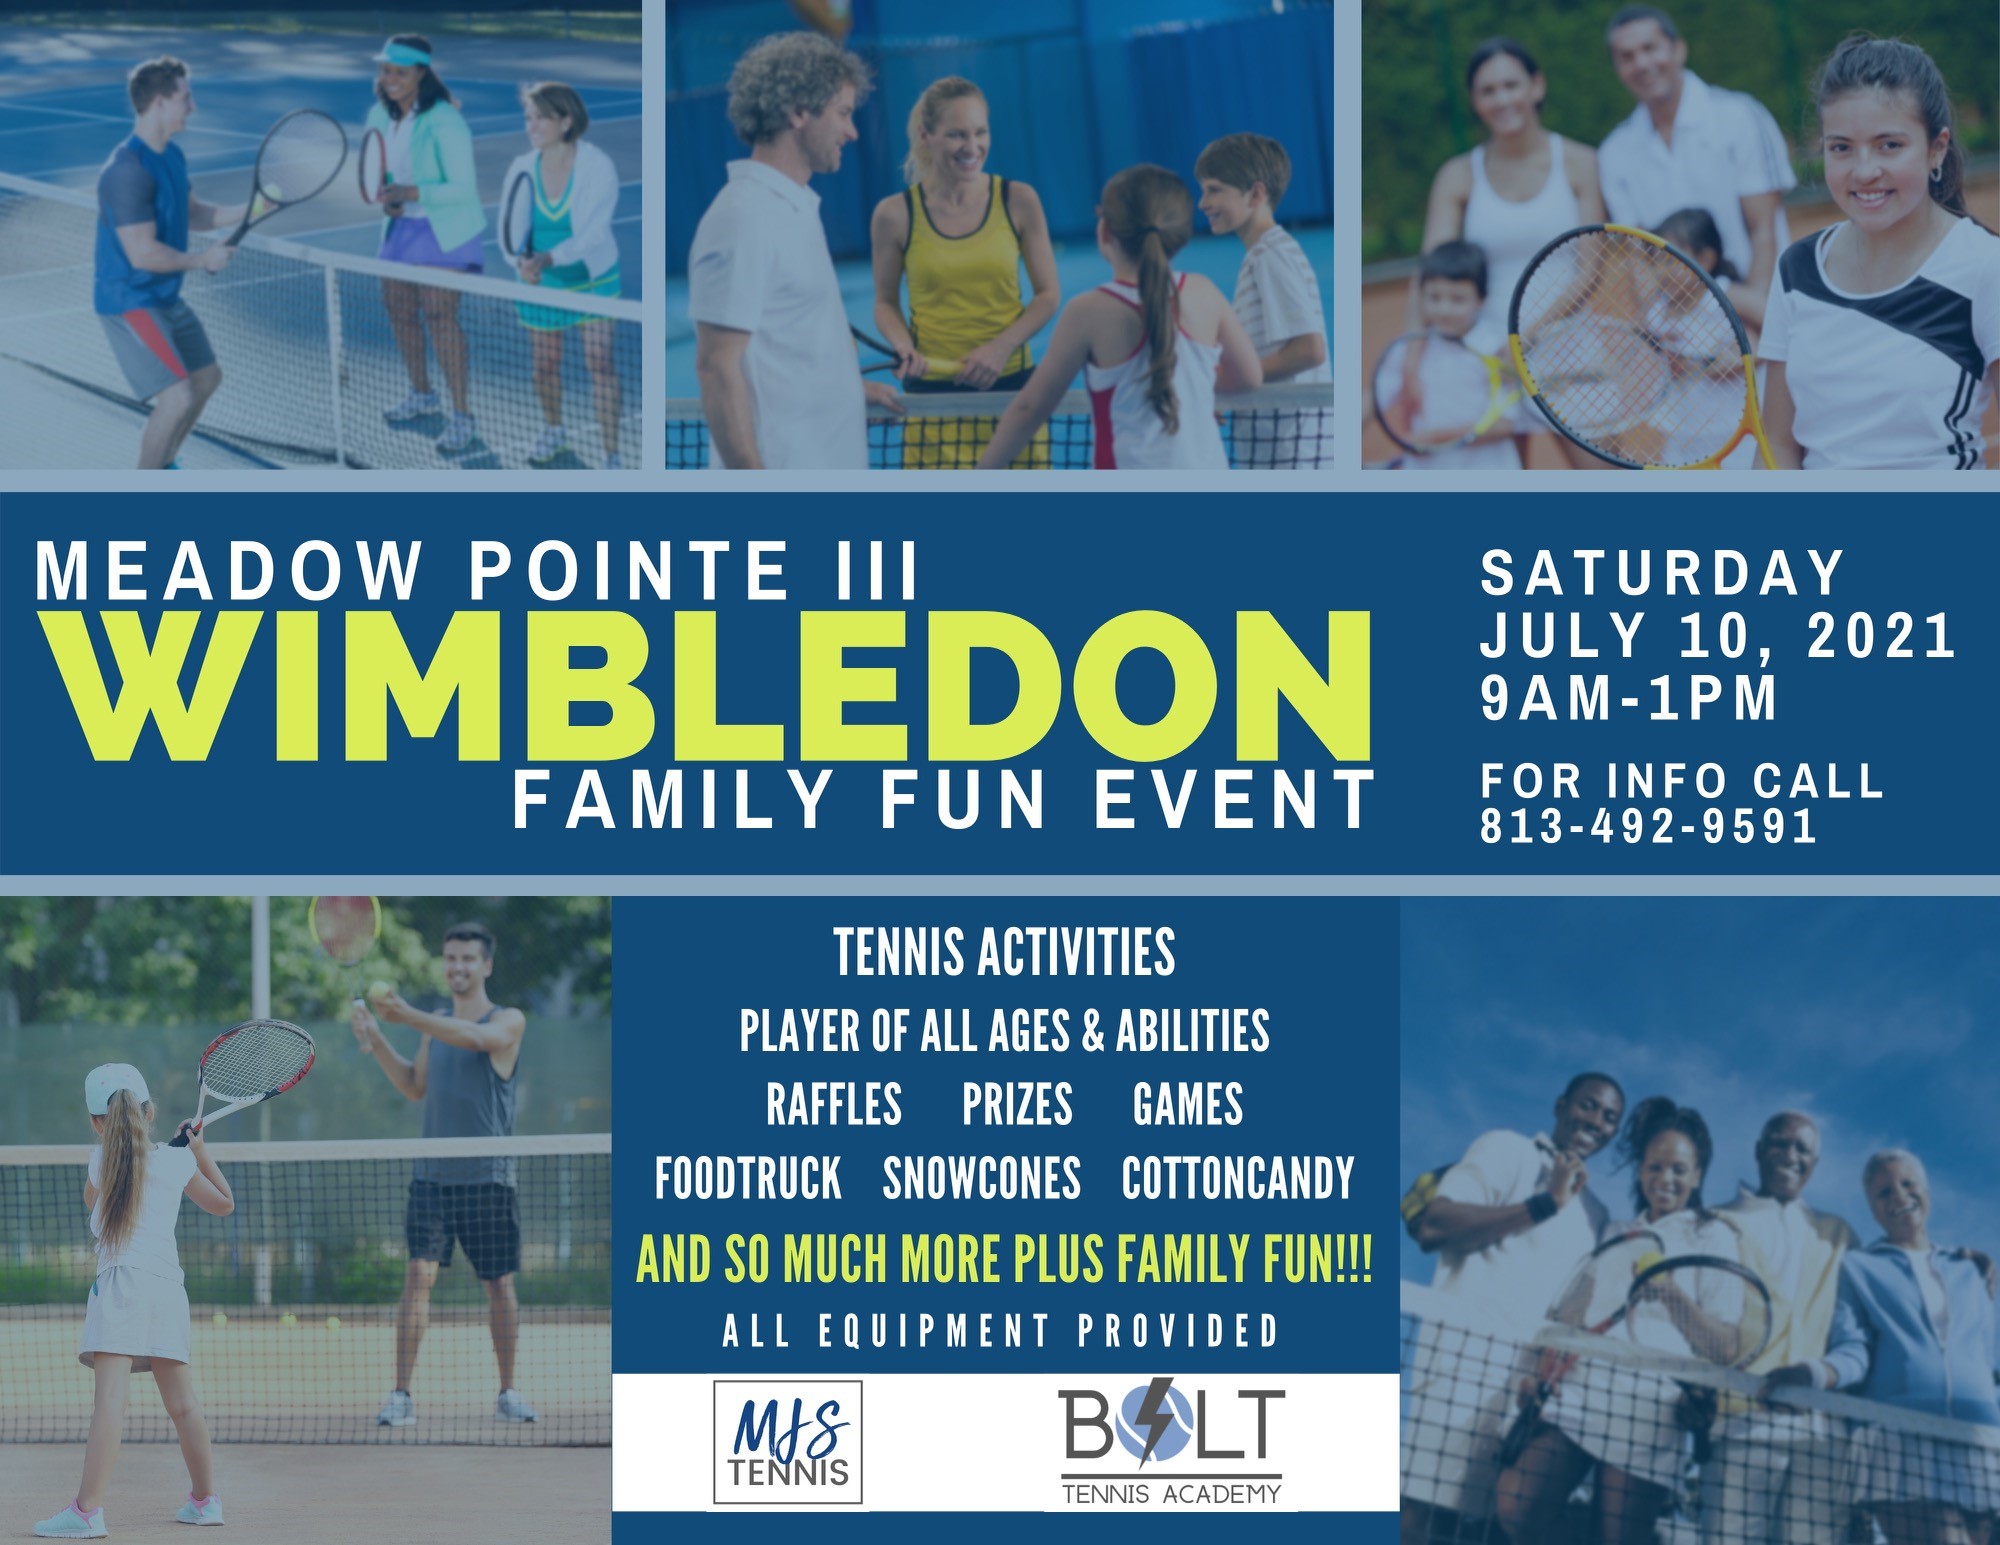 Wimbledon at Meadow Pointe III Family Fun Event Saturday July 10, 2021 9am-1pm For info Call 813-492-9591